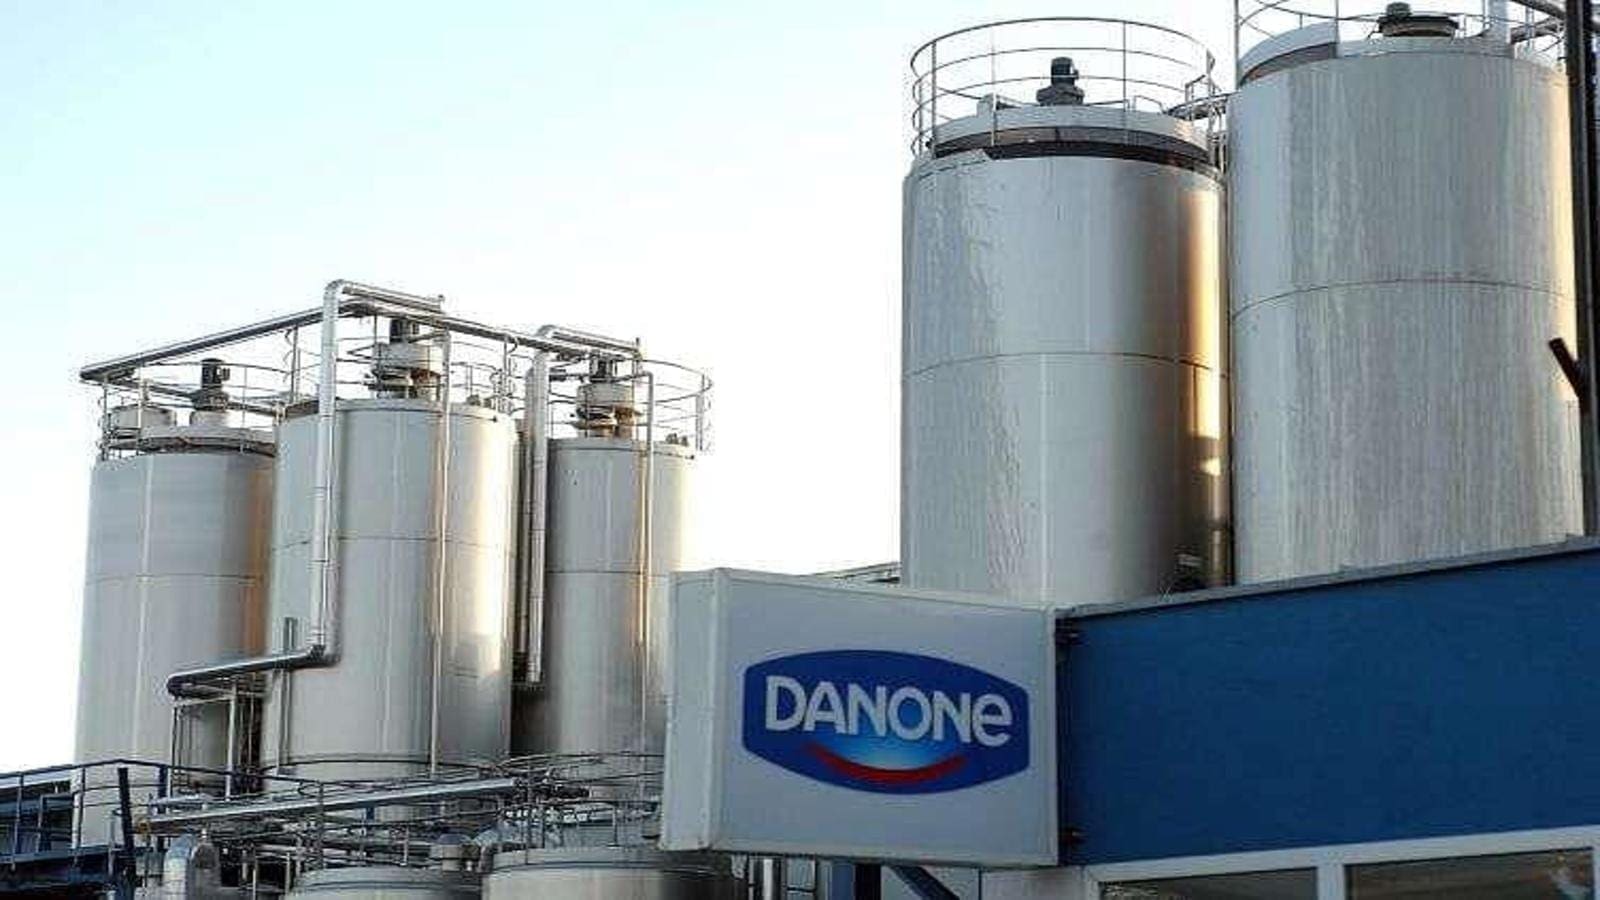 Danone impacted by pandemic in Q1 as Coca-Cola sees slight recovery